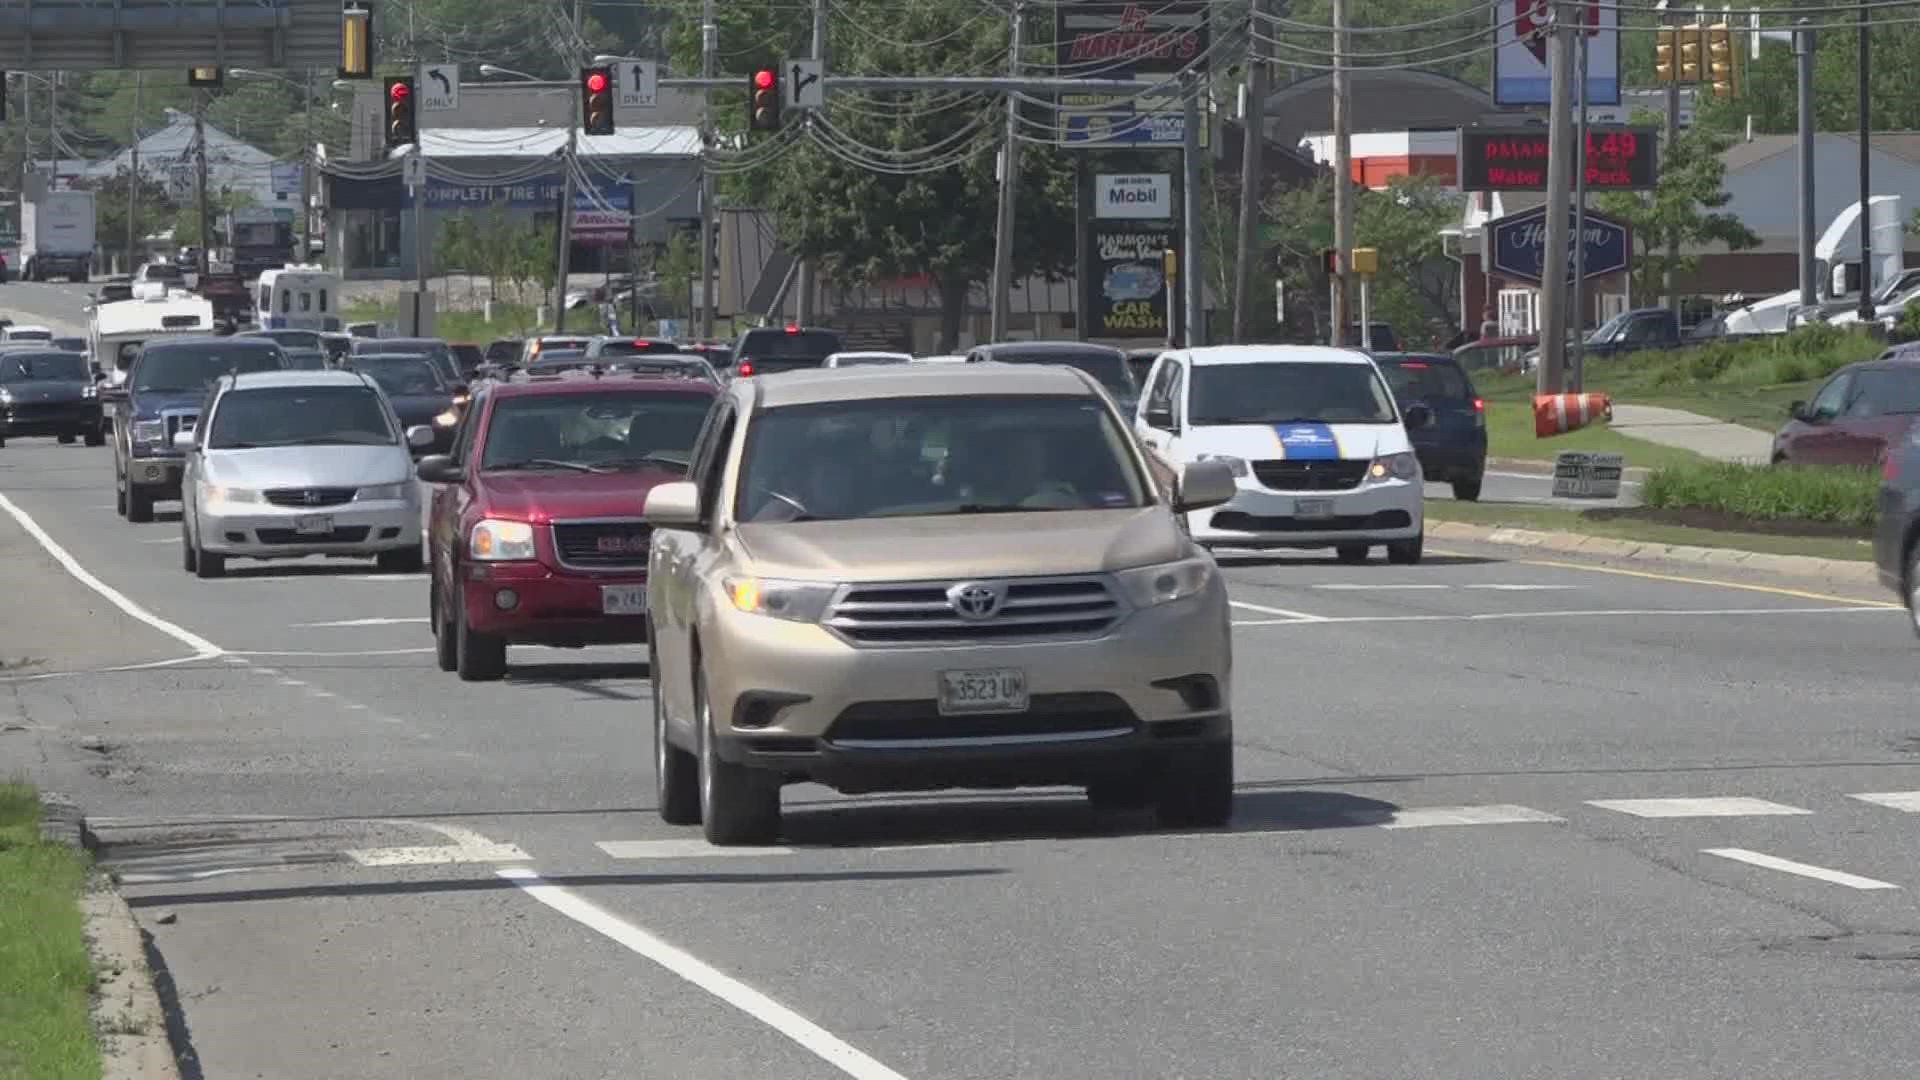 Traffic deaths in Maine are at the highest they have been in years, a recent report indicated.